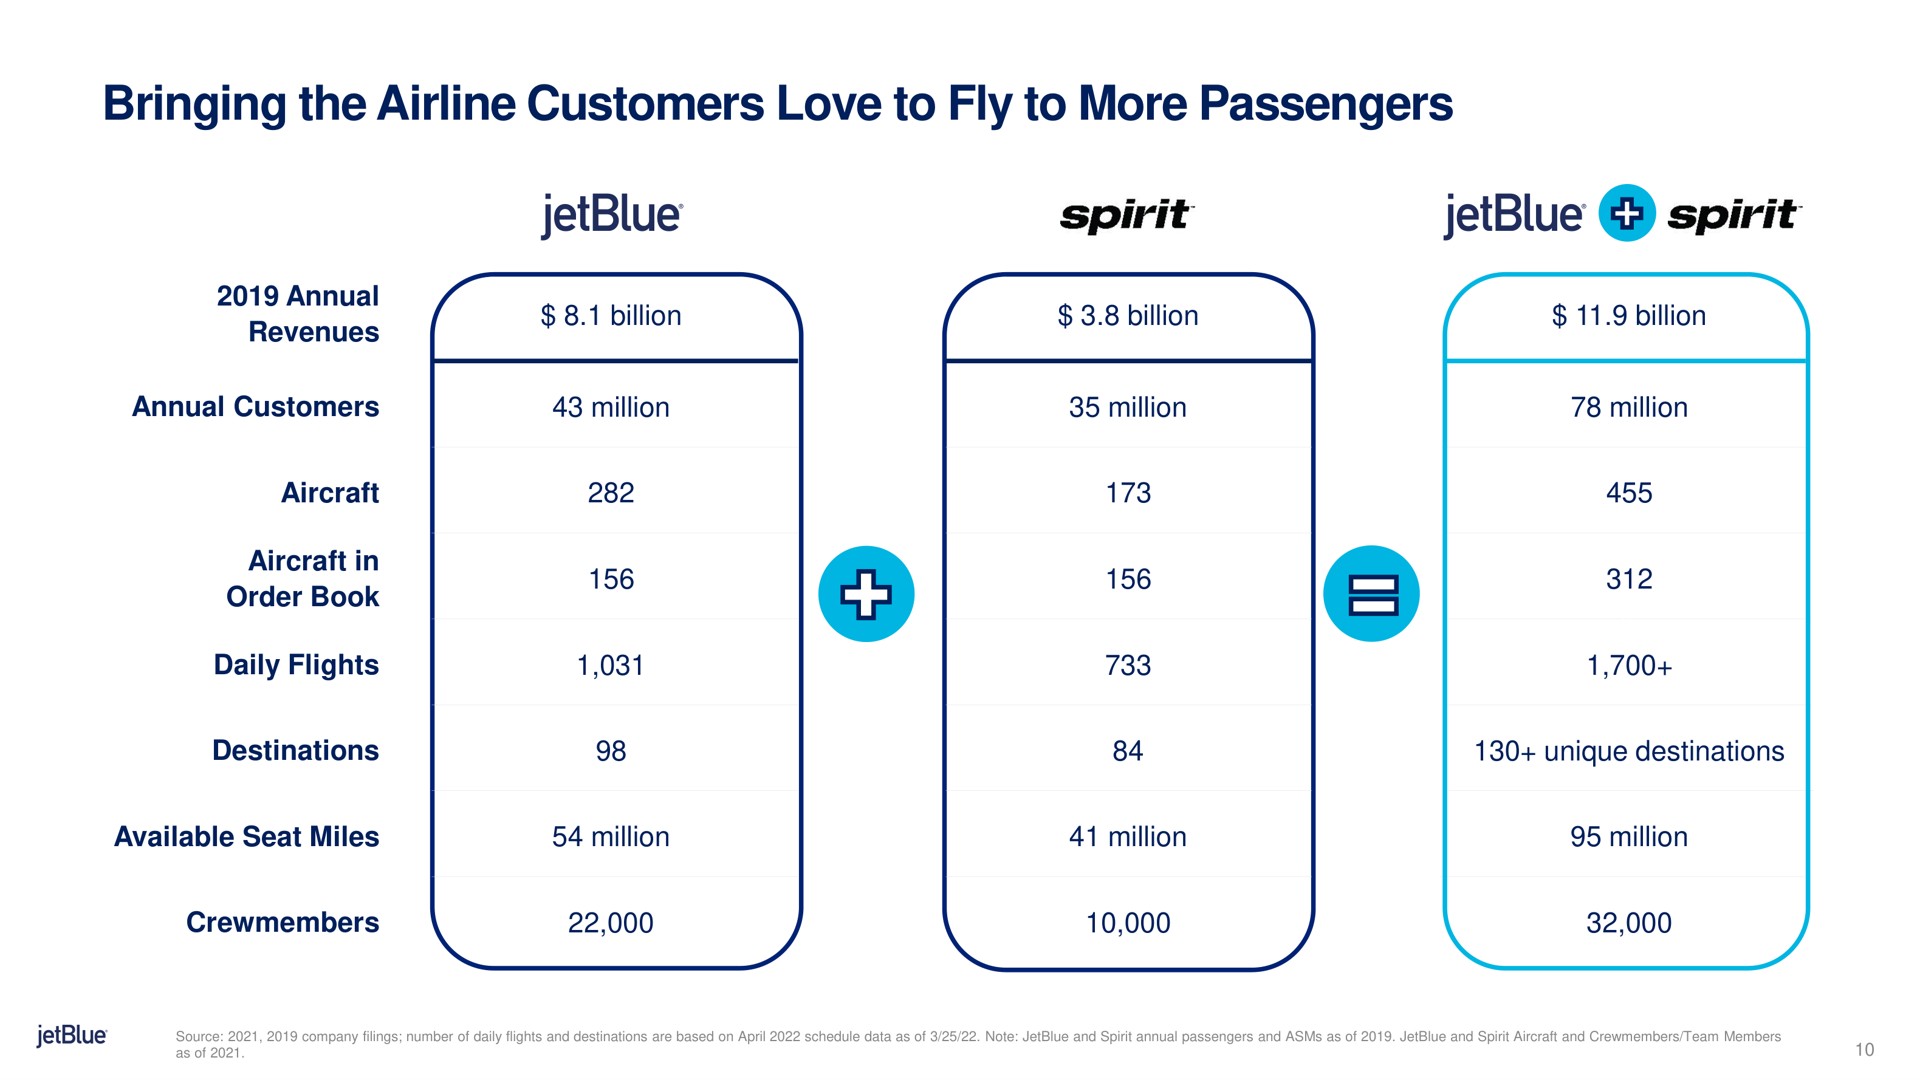 bringing the customers love to fly to more passengers spirit spirit | jetBlue